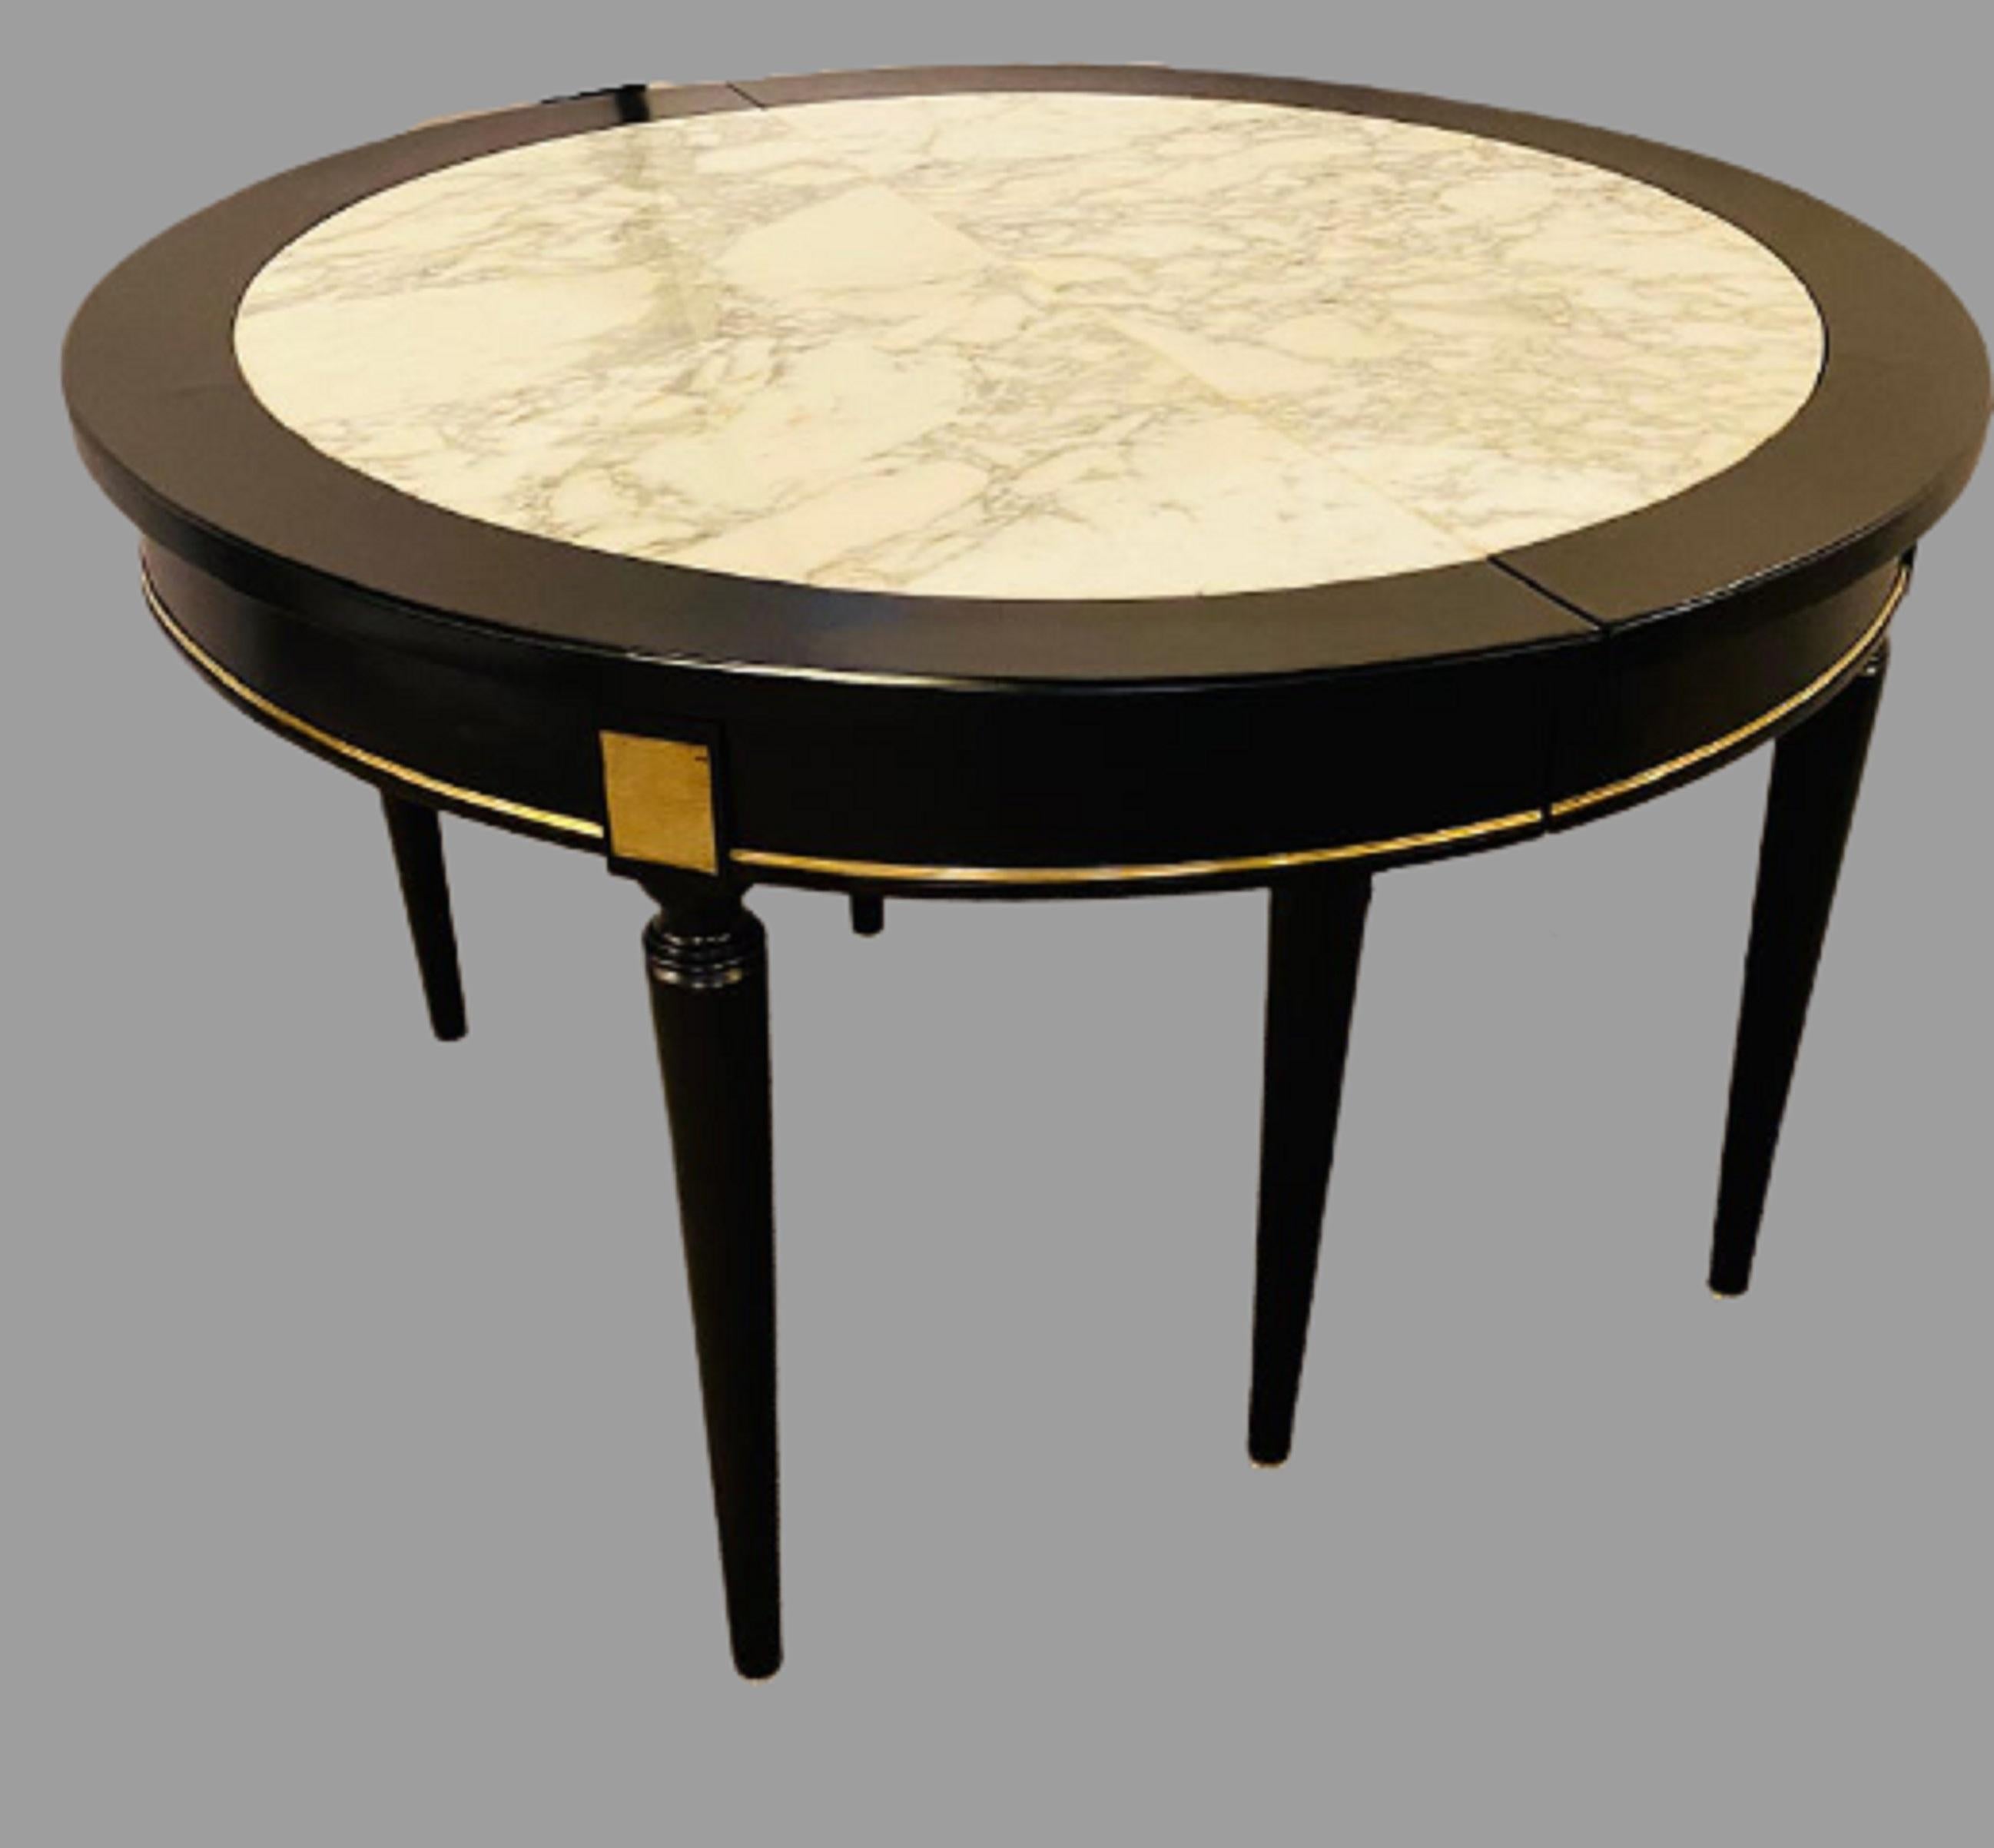 French Hollywood Regency Jansen style ebony center or dining table. Part of our extensive collection of over forty dining tables and chair sets as seen on this site, thus why we are referred to as the King of Dining rooms.
Having a Carrara white